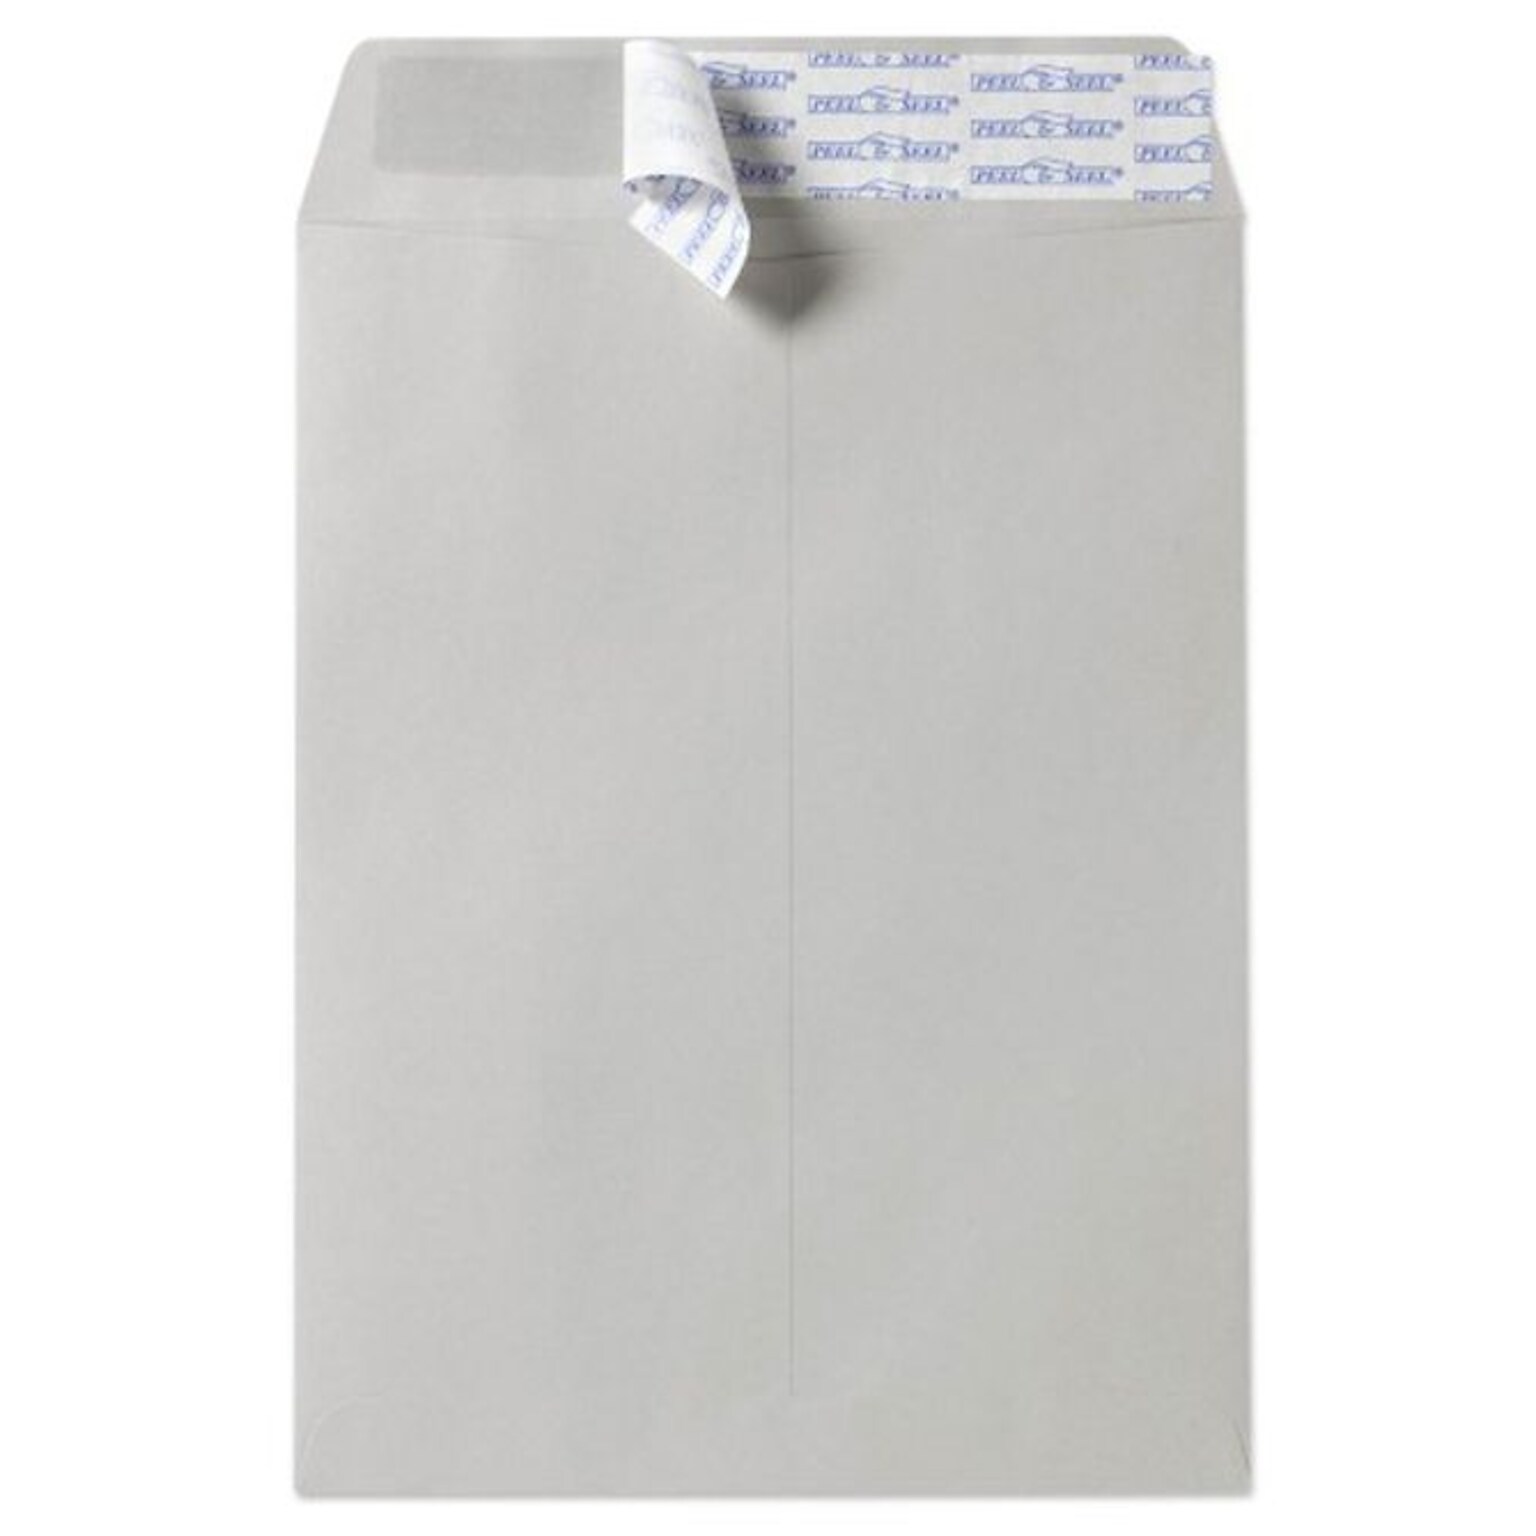 LUX® 12 x 15 1/2 Open End Envelopes With Peel & Seal, Gray Kraft, 50/Pack